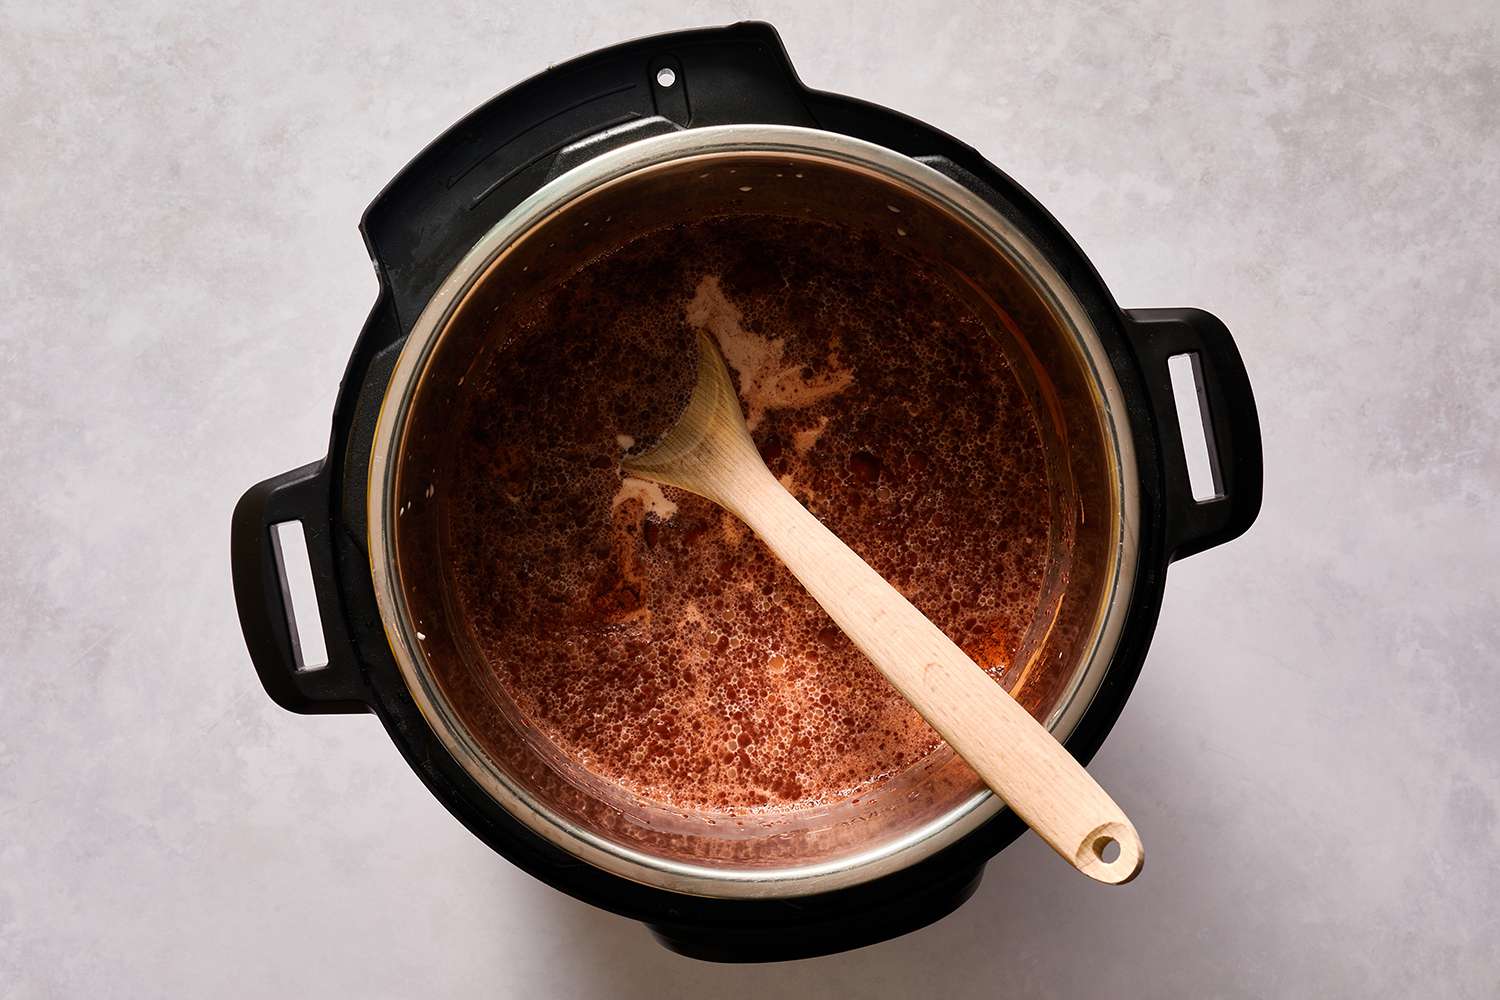 hot chocolate ingredients in crock pot with wooden spoon